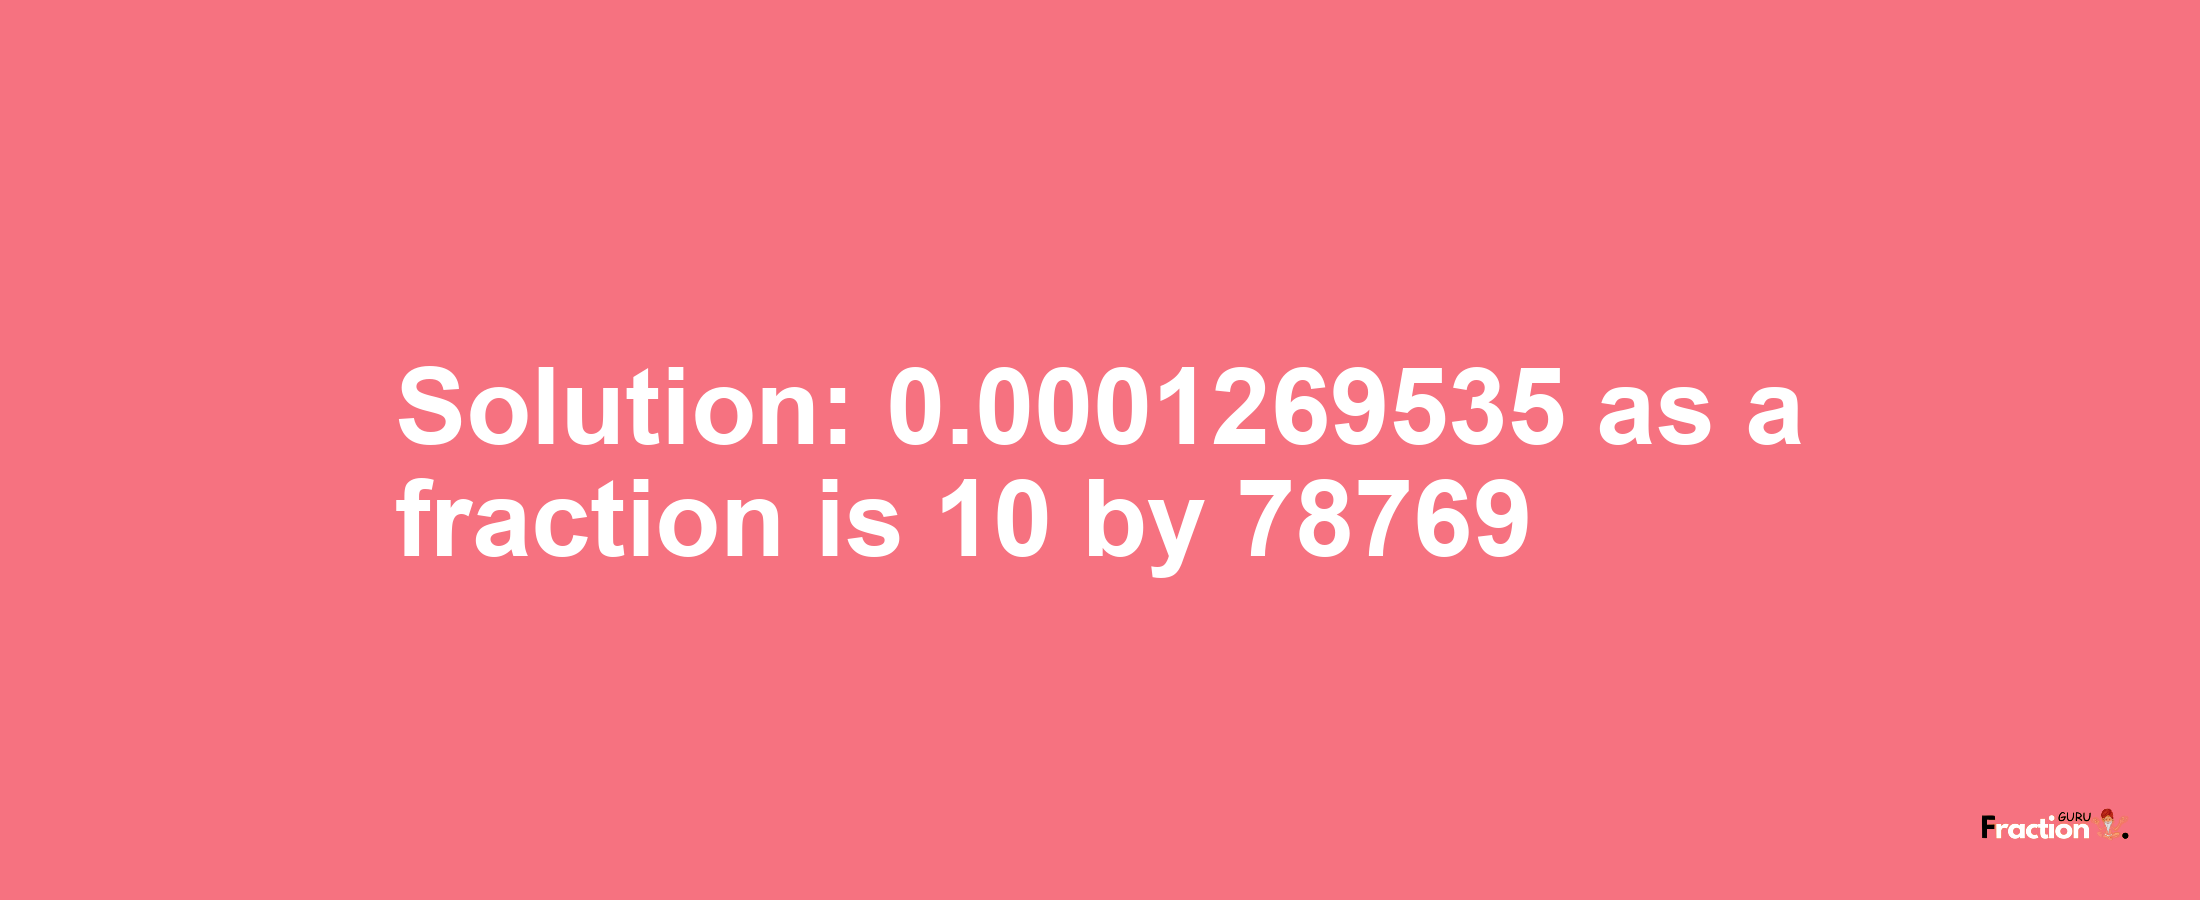 Solution:0.0001269535 as a fraction is 10/78769